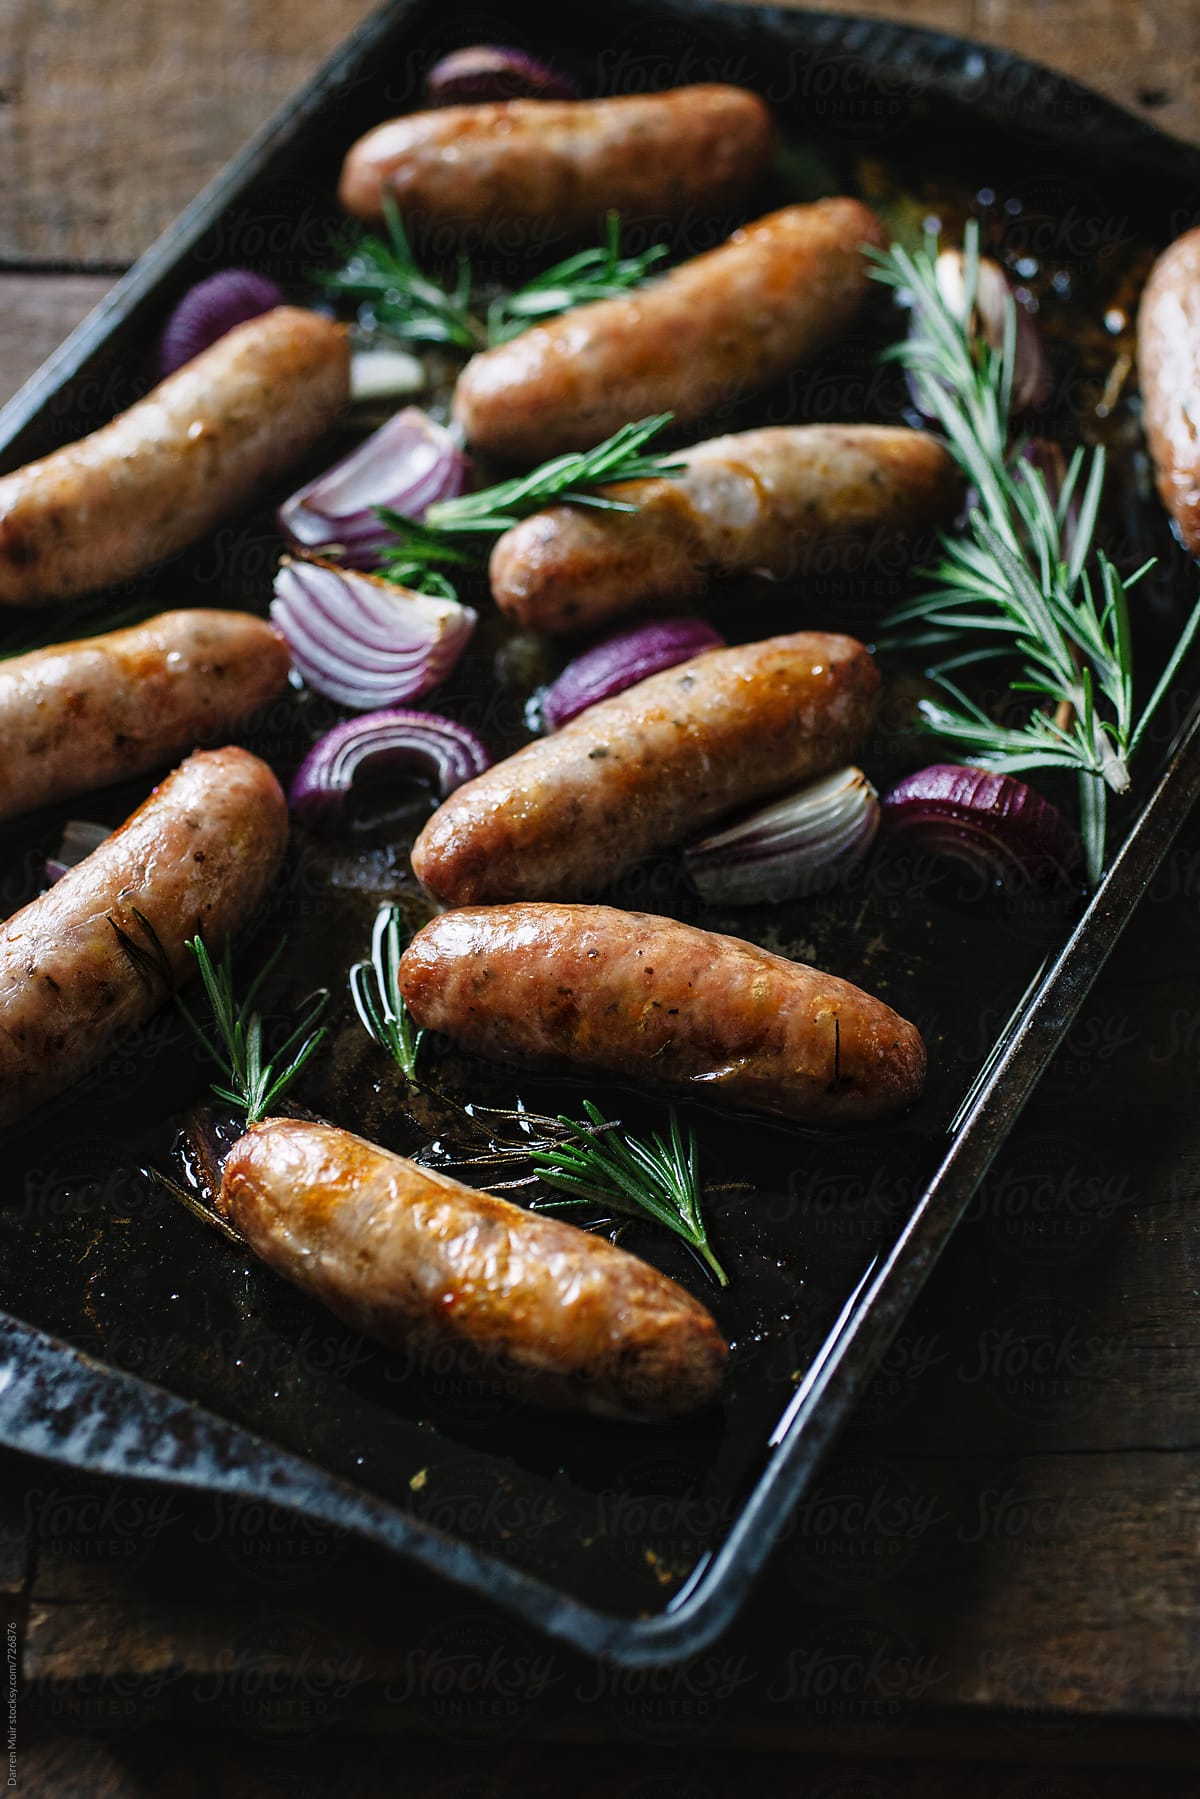 Cooked sausages with red onion and rosemary on a roasting tray.